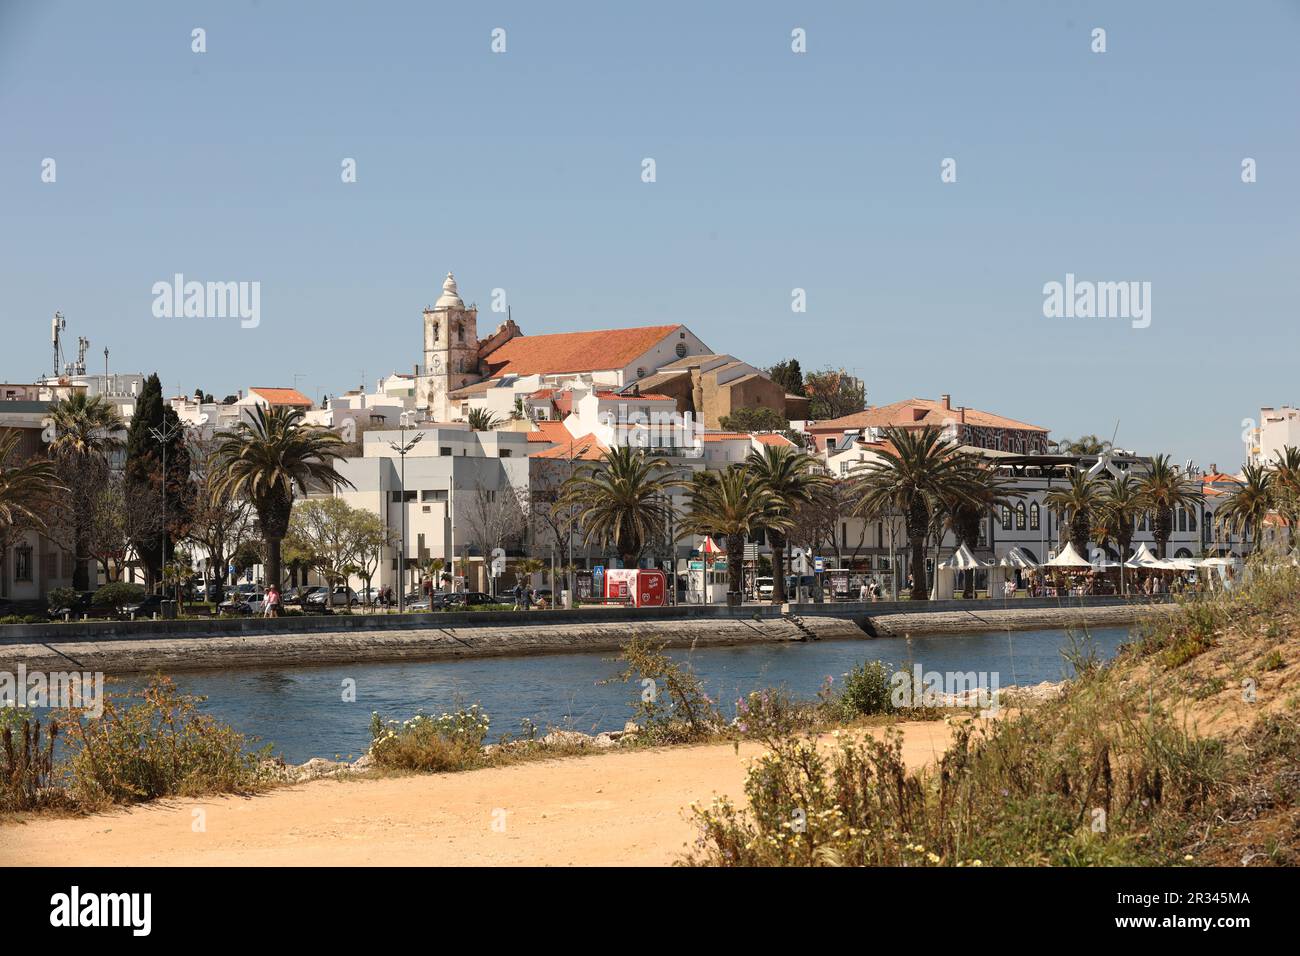 View of the Avenida and Old Town, Lagos, Algarve, Portugal Stock Photo